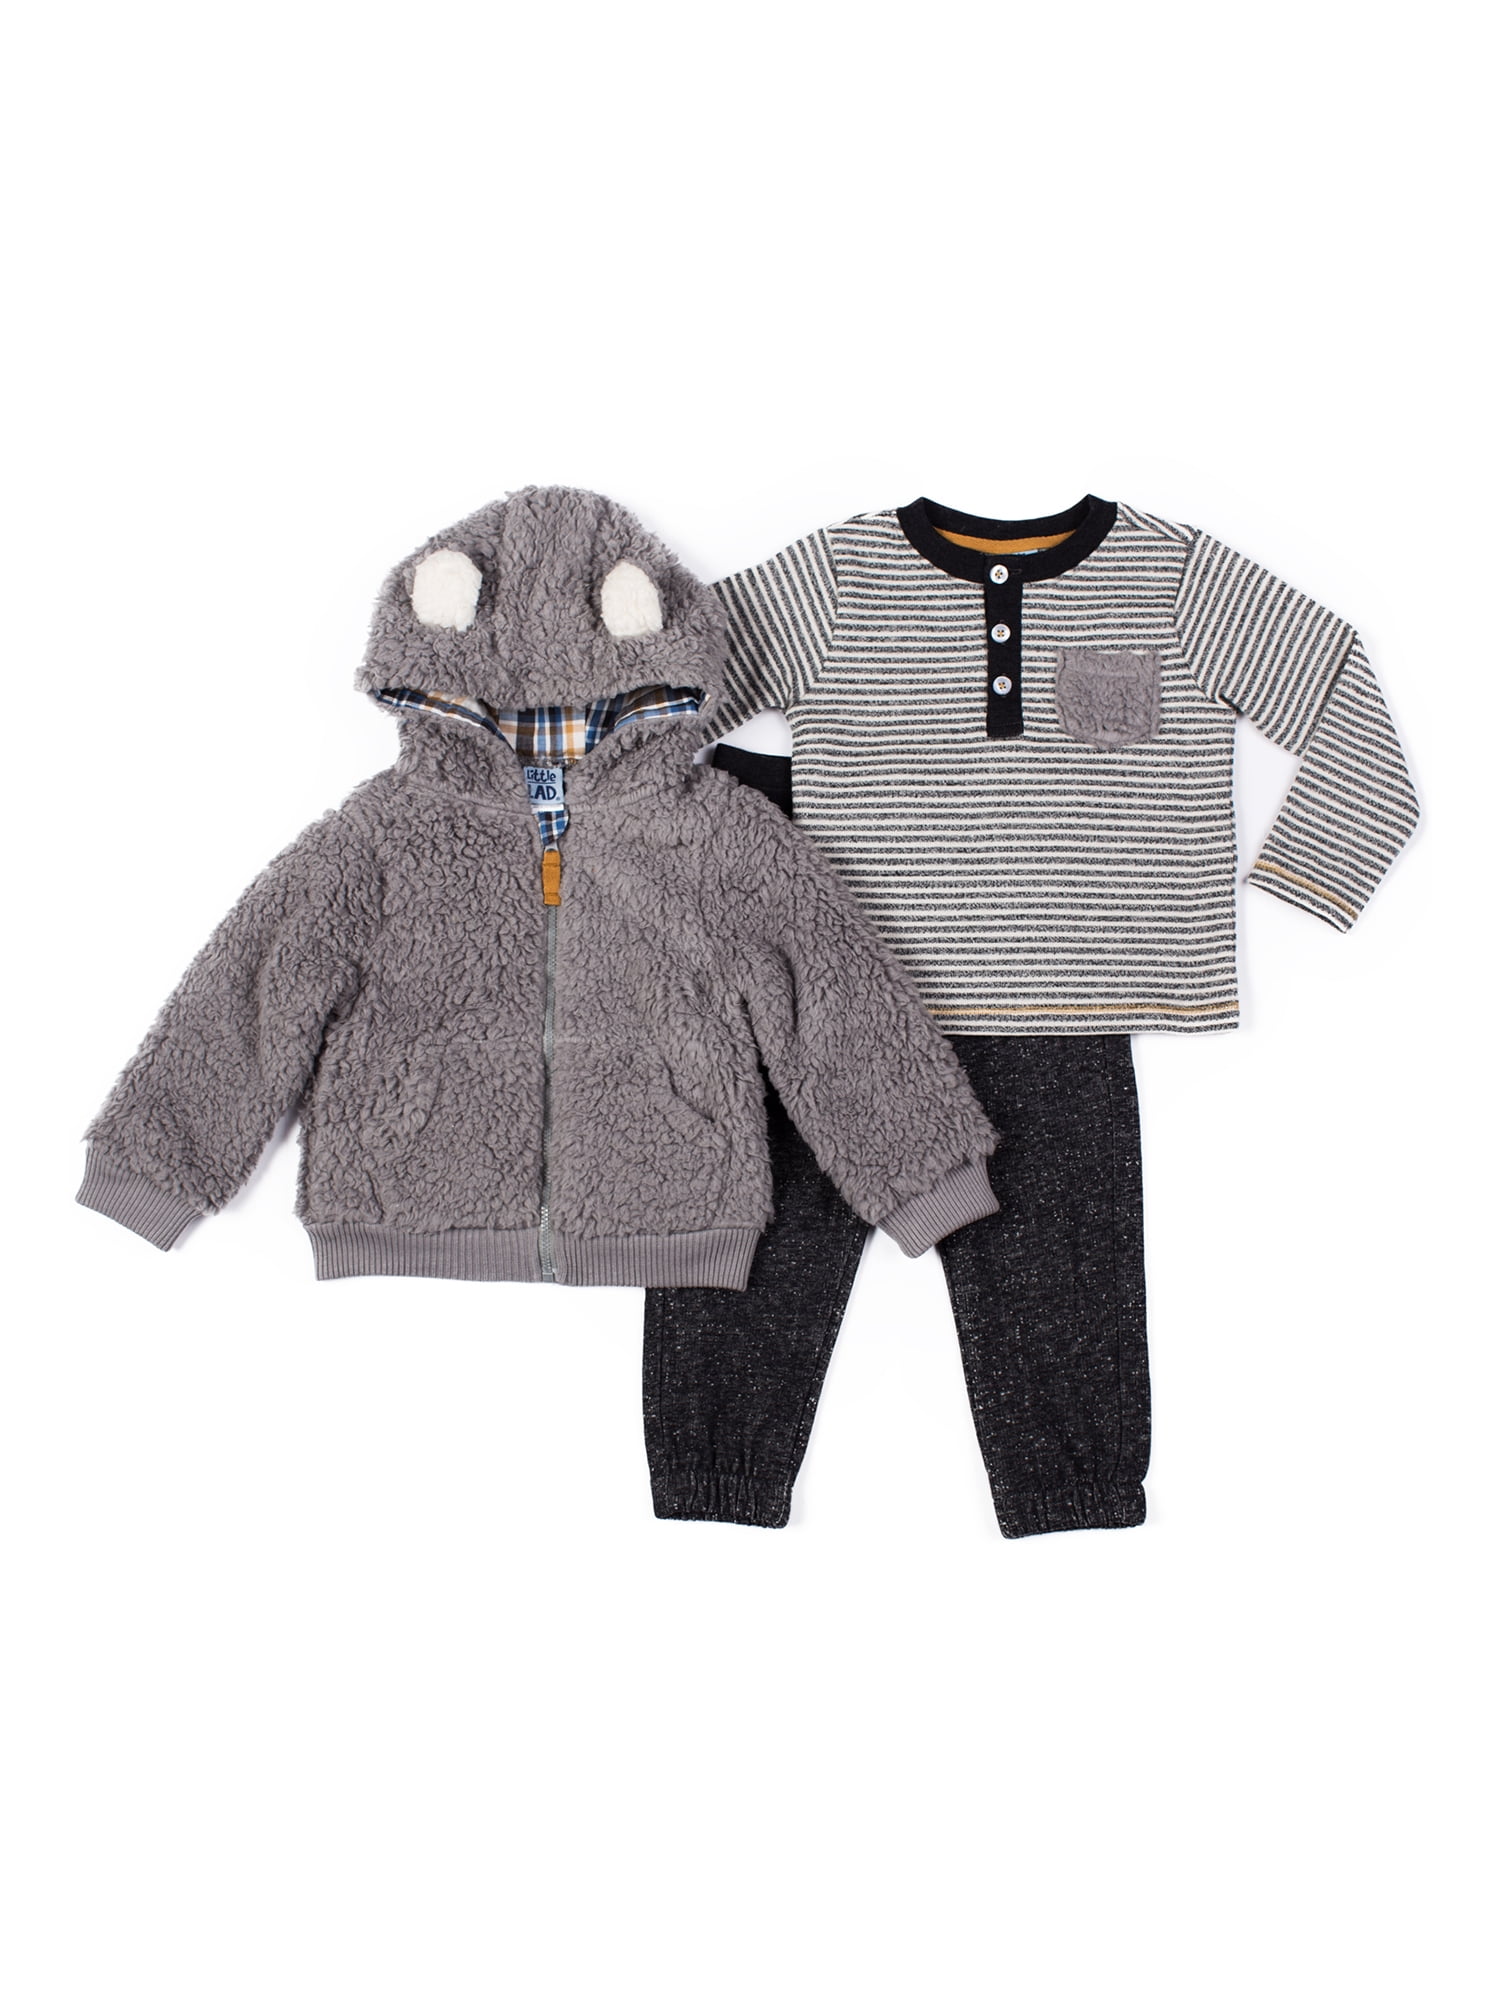 Little Lad Baby Boy Hooded Sherpa Jacket, Long Sleeve Shirt and Pant